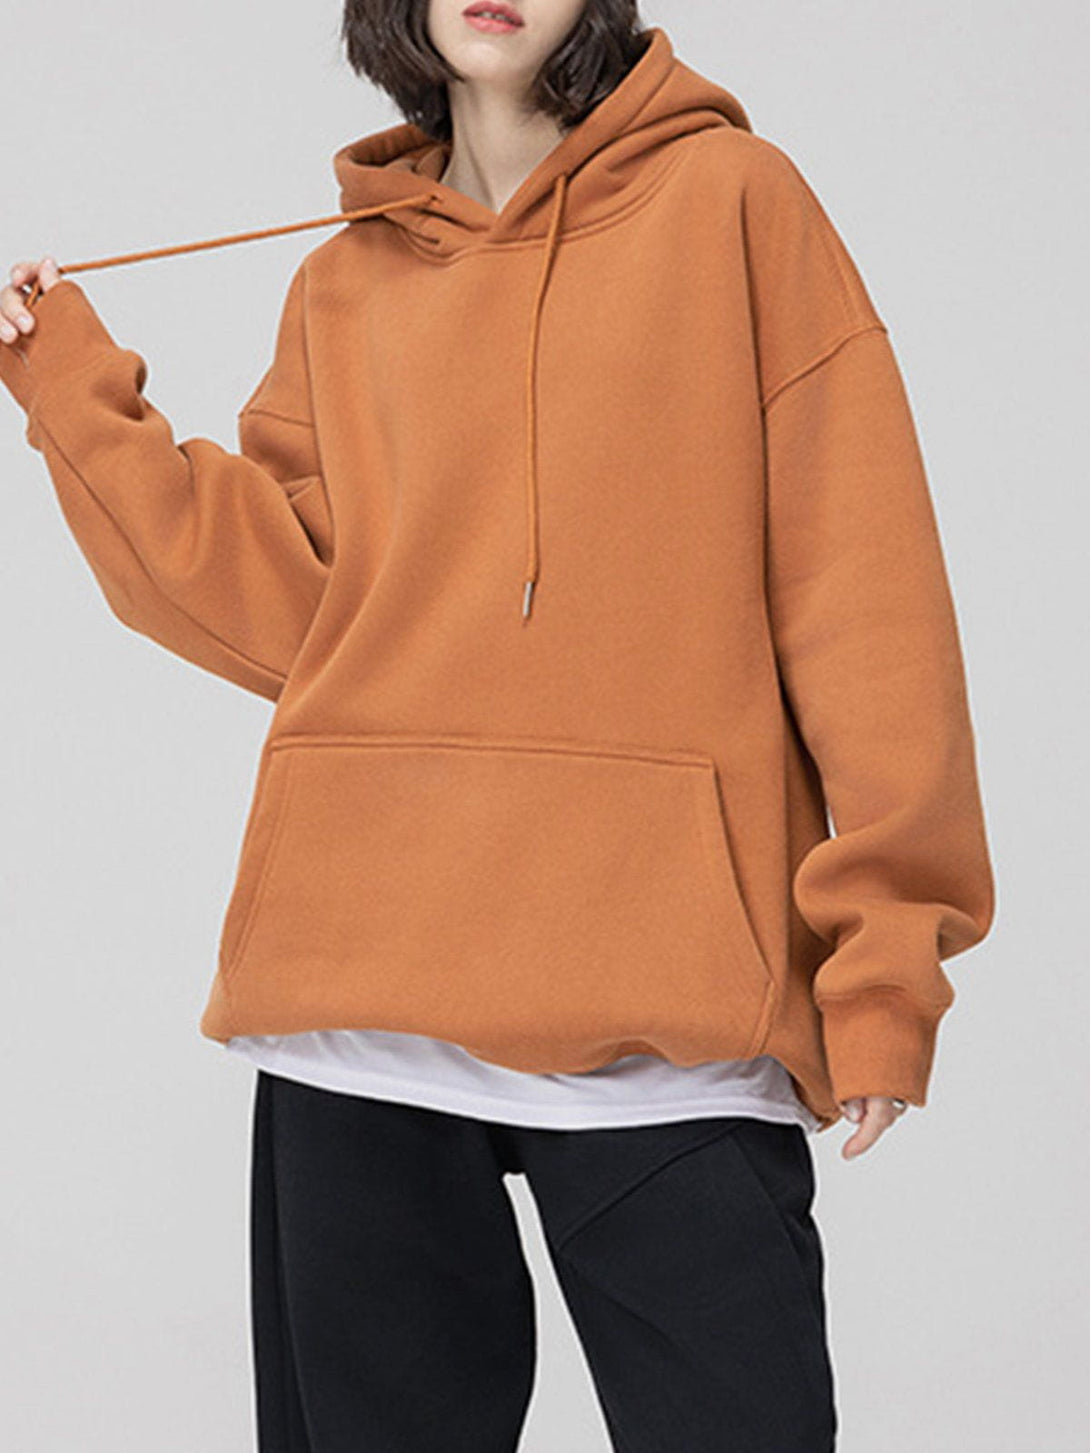 Majesda® - Solid Color Drawstring Hoodie outfit ideas streetwear fashion